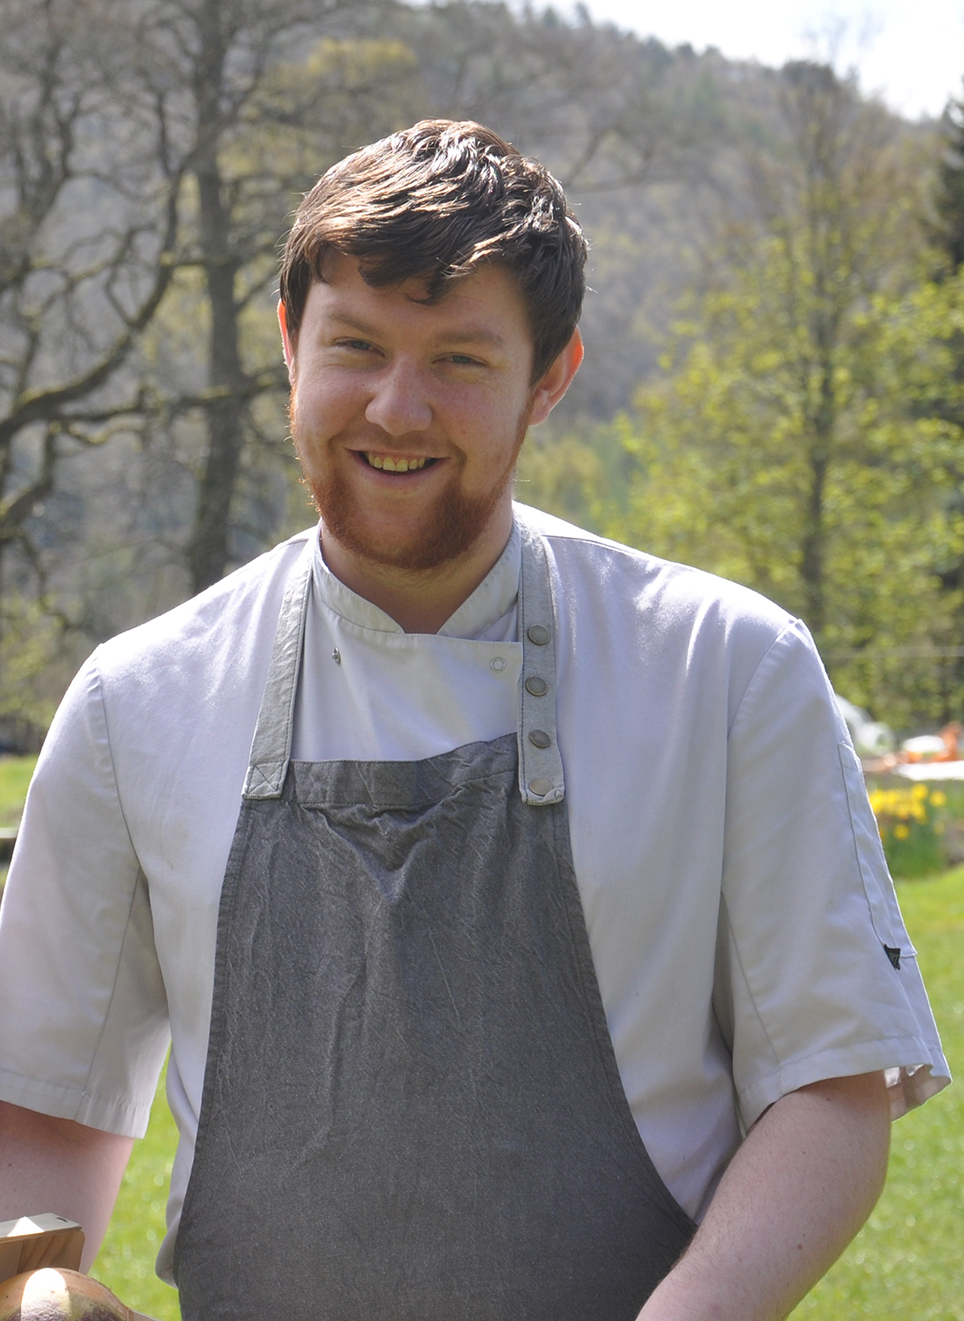 Jordan is Scotland’s contender for young chefs’ “Hall of Fame”